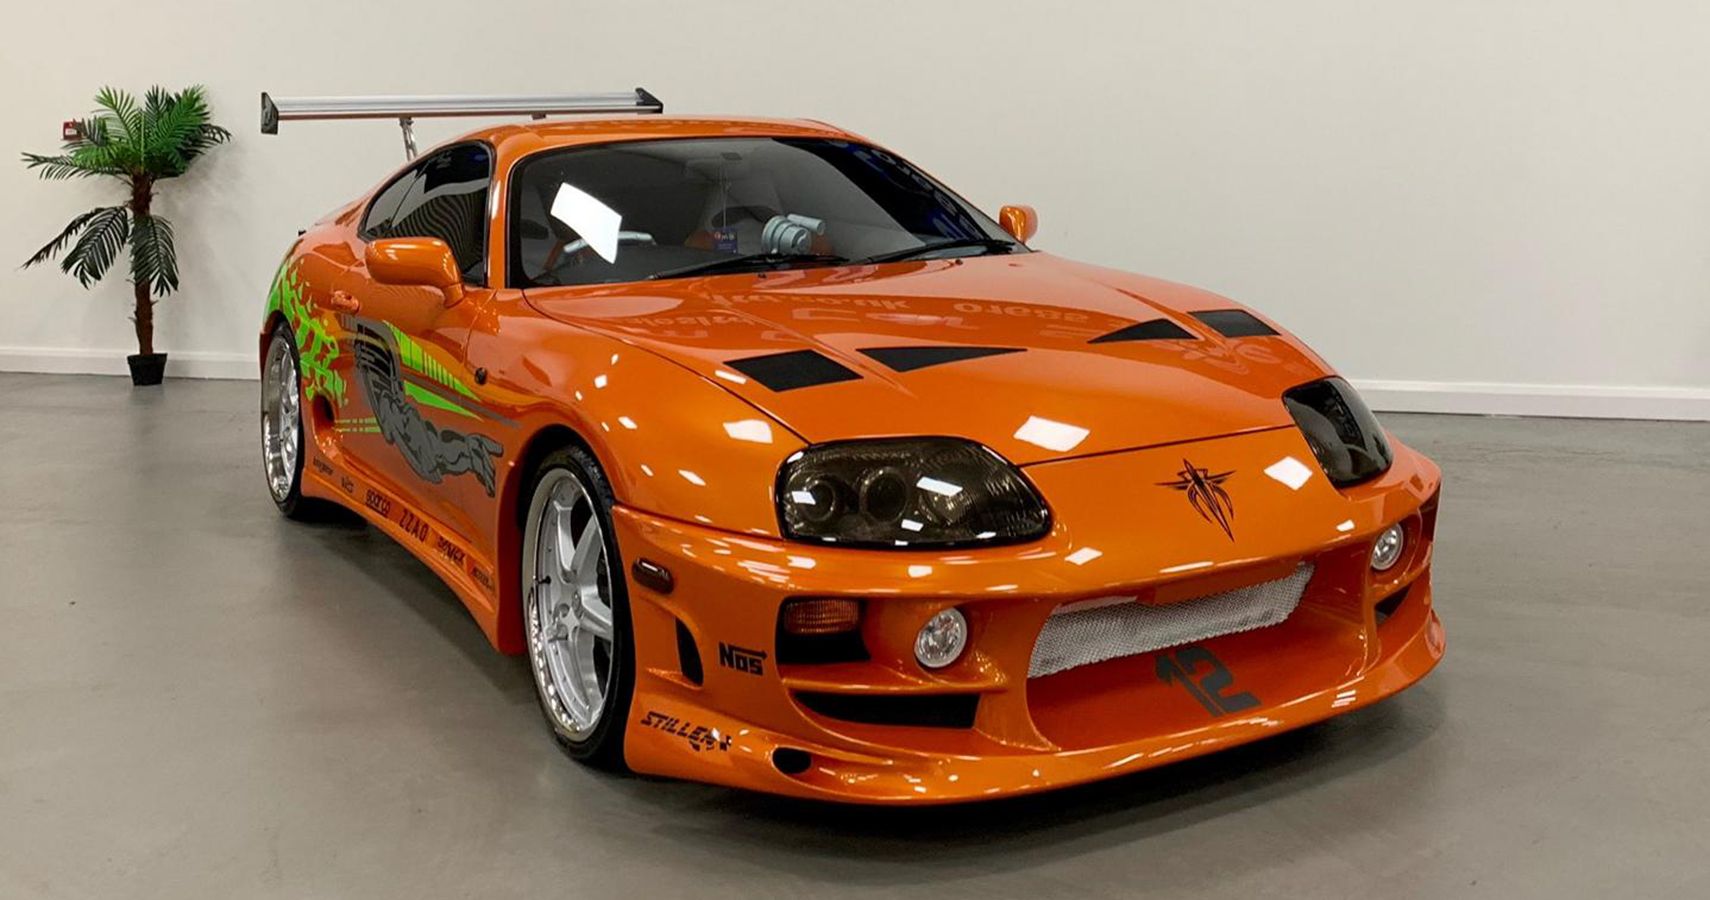 The Toyota Supra Is The Cover Car That O’conner Works On, Souping It Up To Illegally Race The Streets At Night And Make Money Off The Winning Bets